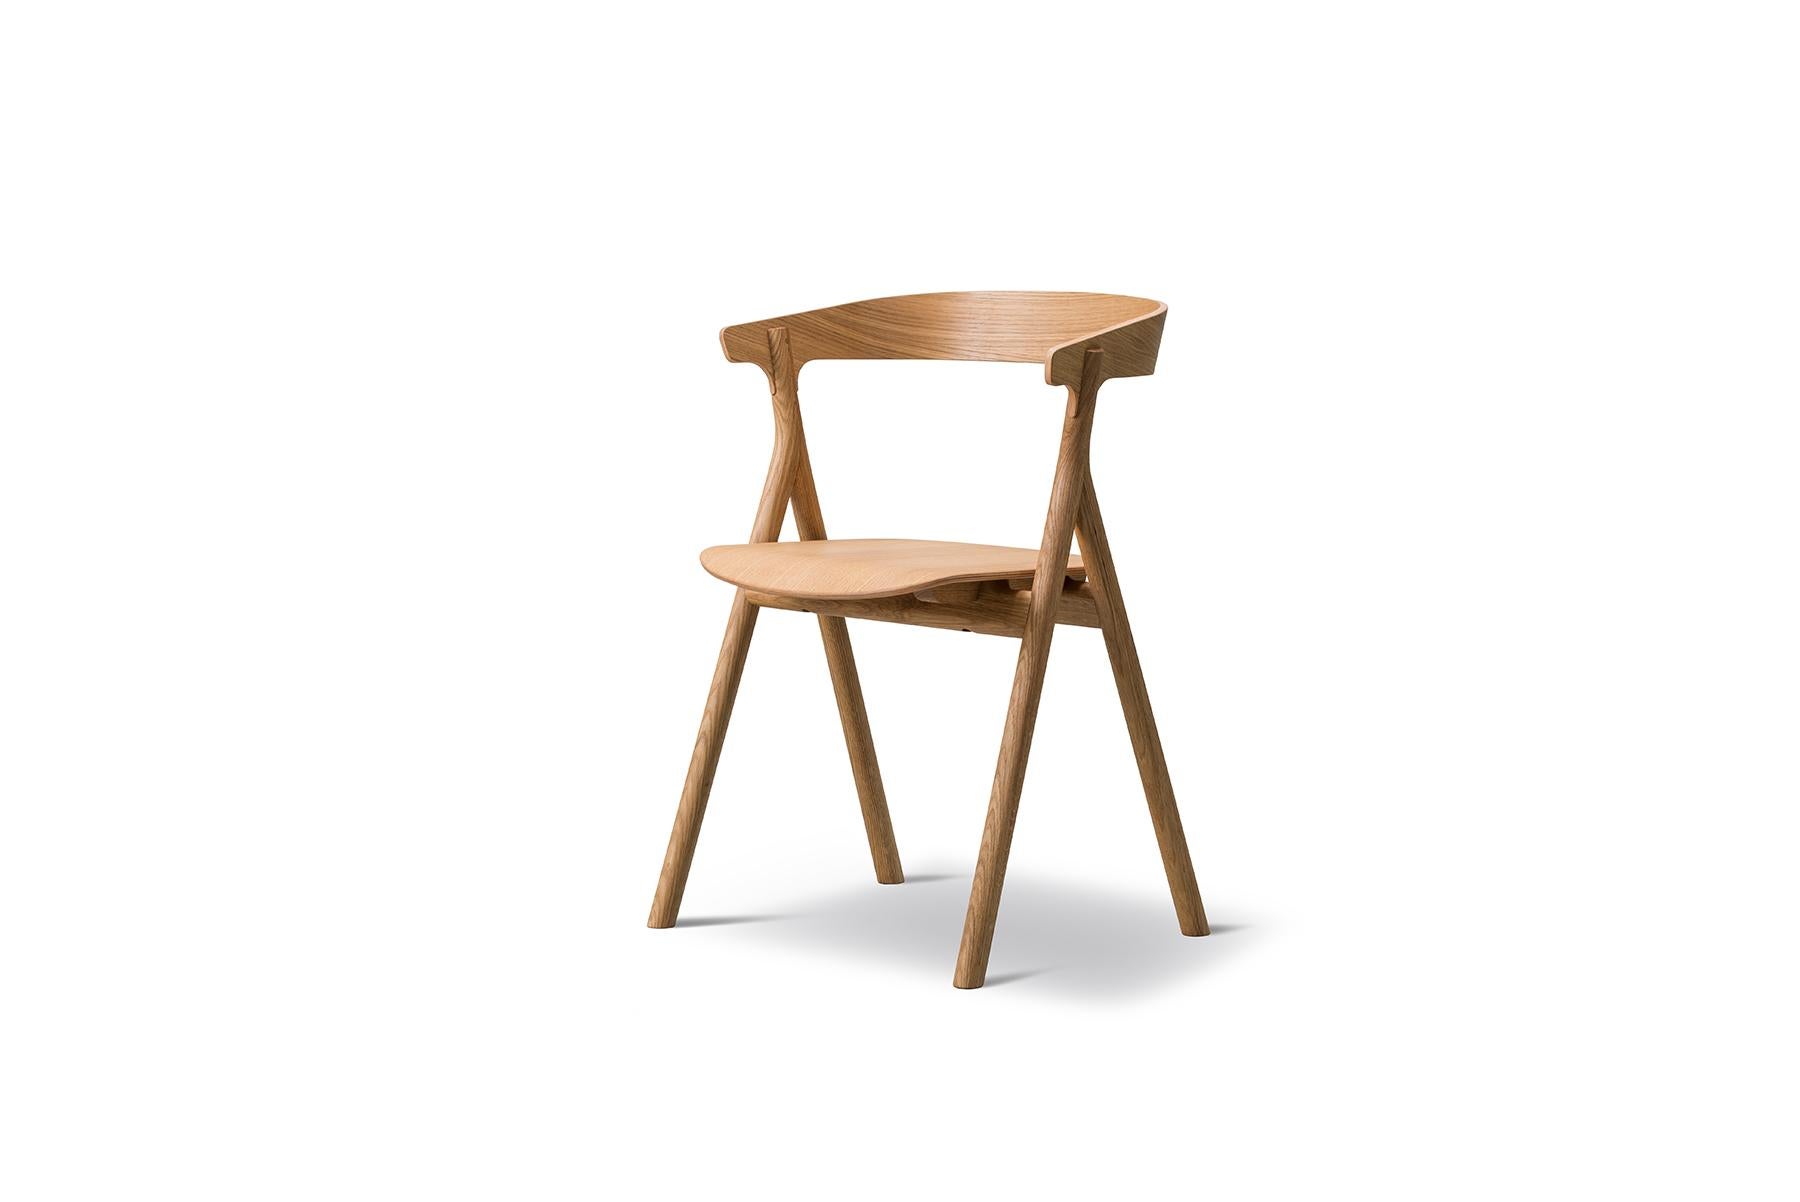 Thau + Kallio Yksi chair is available with a comfortable seat upholstery and two chairs can be stacked for compact storage making it a perfect choice from residential homes and professional workspaces to cafes and restaurants.